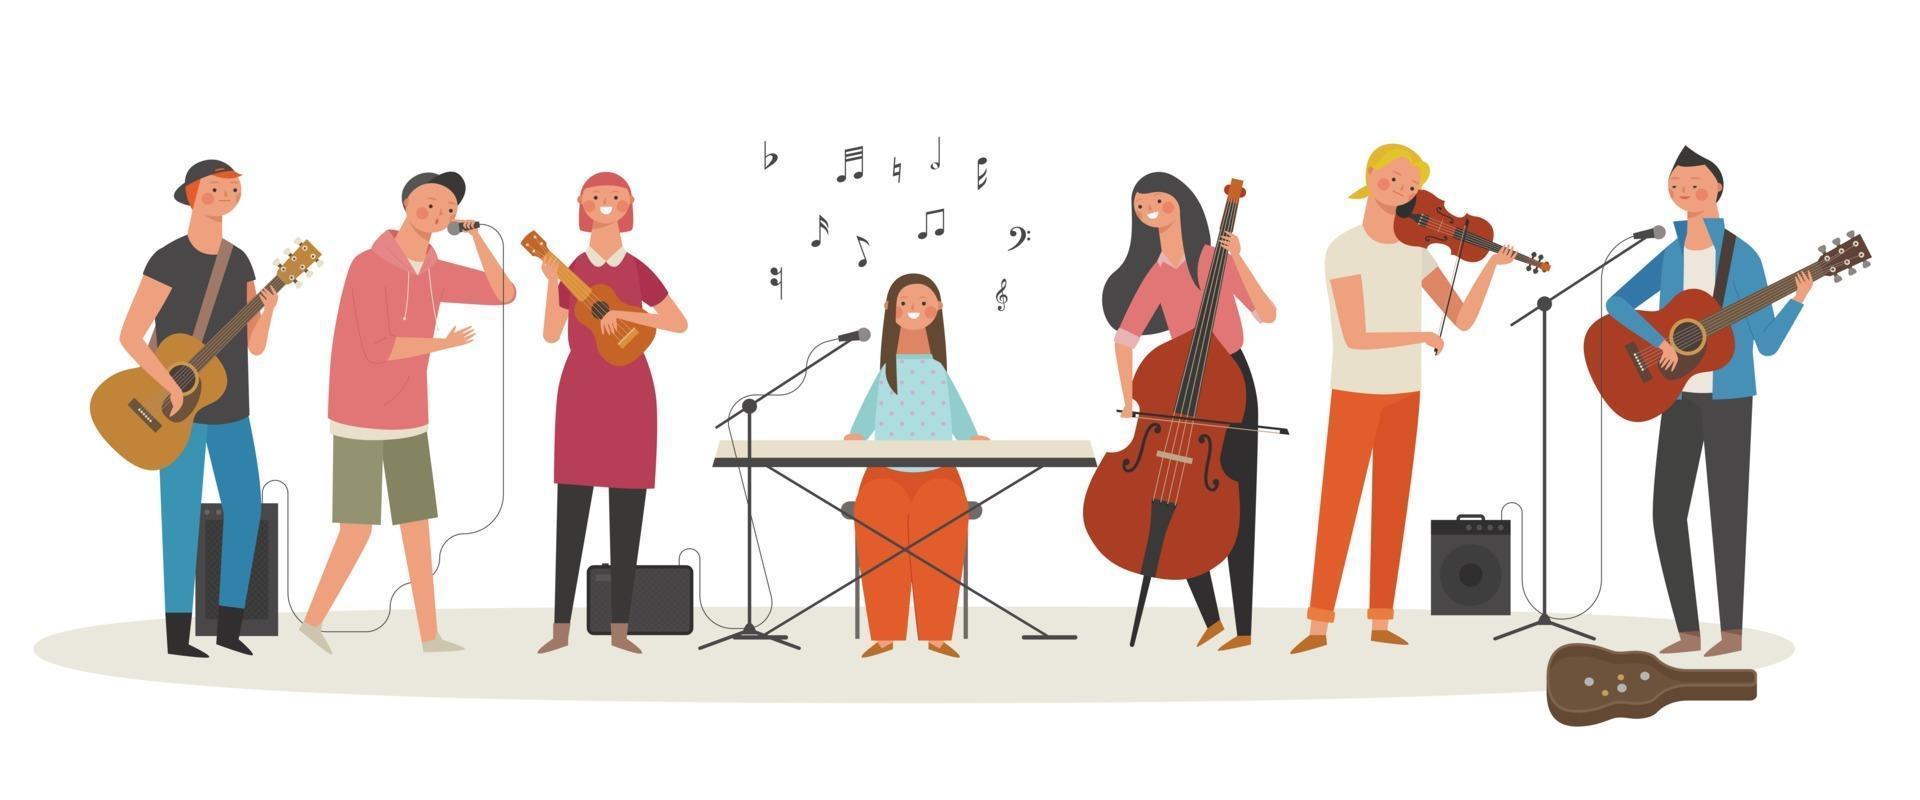 Young people playing musical instruments and singing in the street. vector